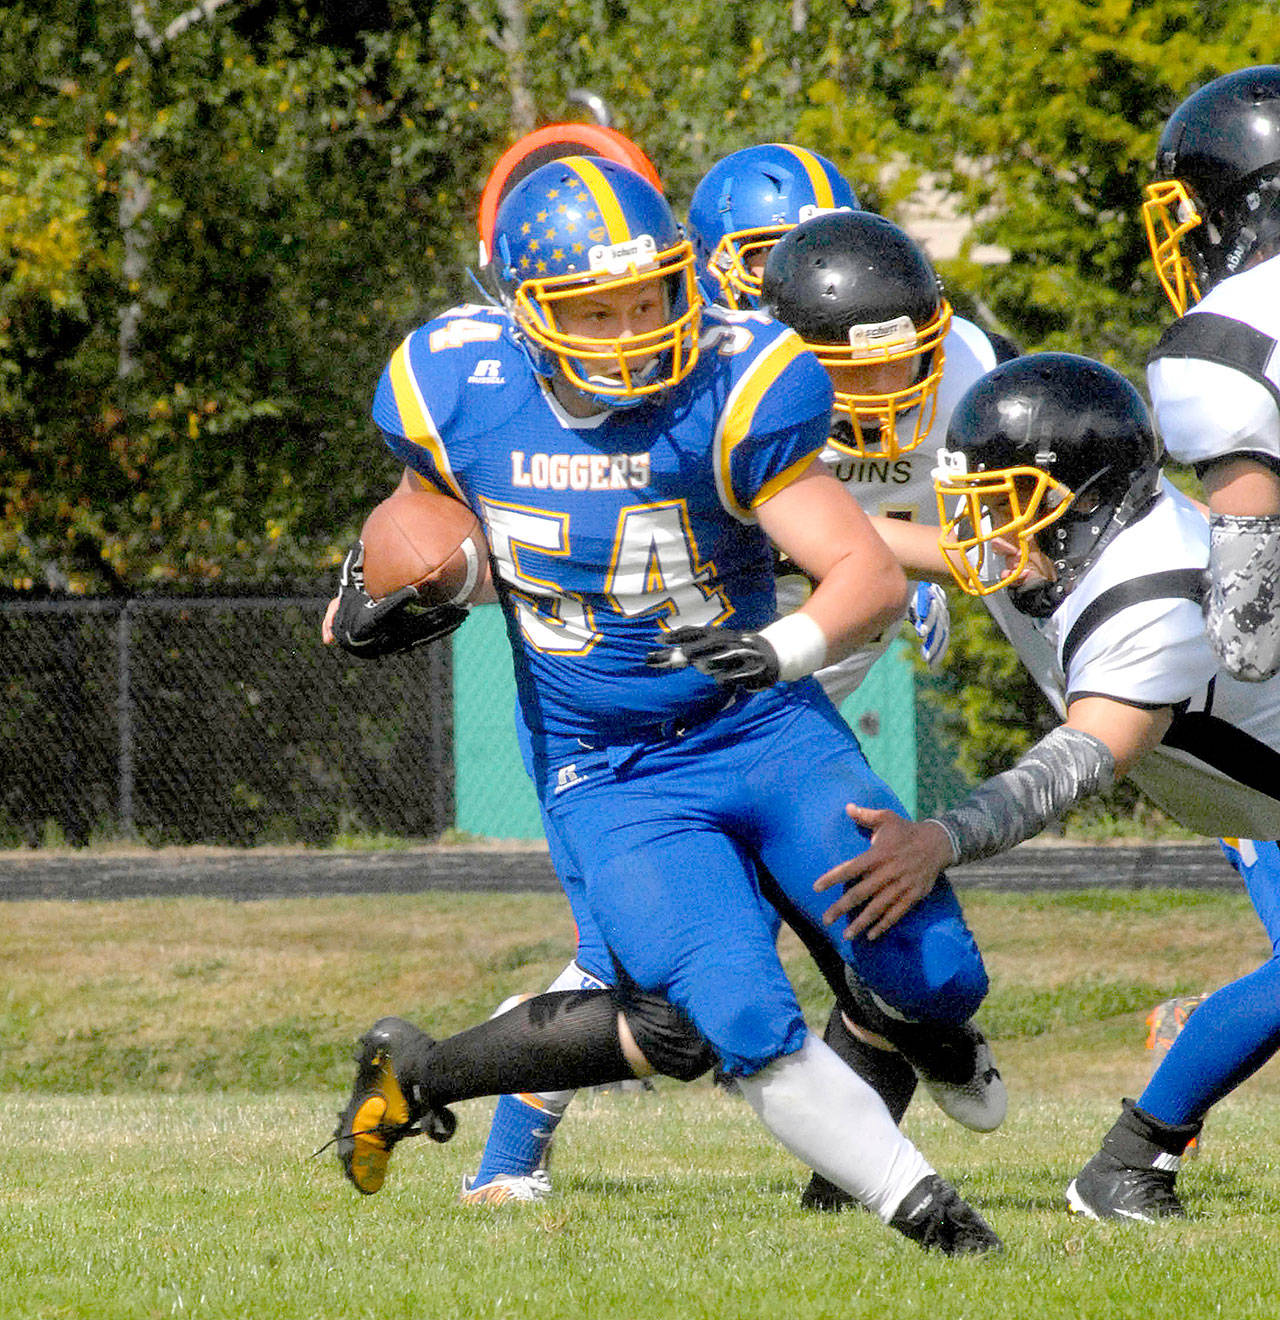 Crescent’s Noah Leonard (54) carries against Clallam Bay during the 2017 season. Leonard finished the season with 1,220 rushing yards and 23 touchdowns and is back for the Loggers this year. (Keith Thorpe/Peninsula Daily News)